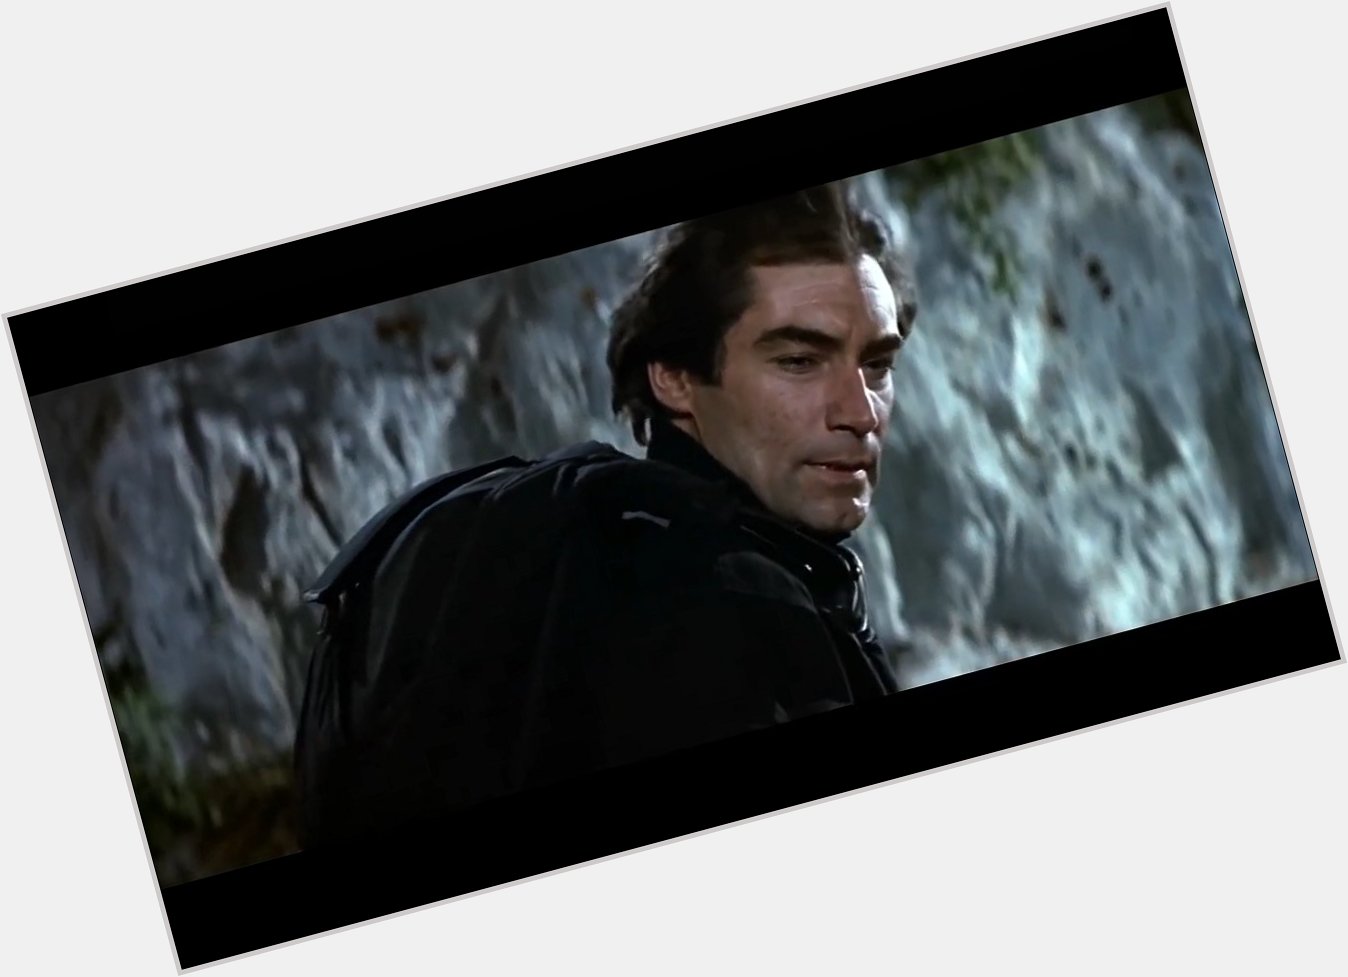 Happy birthday to Timothy Dalton! Star of the Living Daylights and Licence To Kill.

21 March 